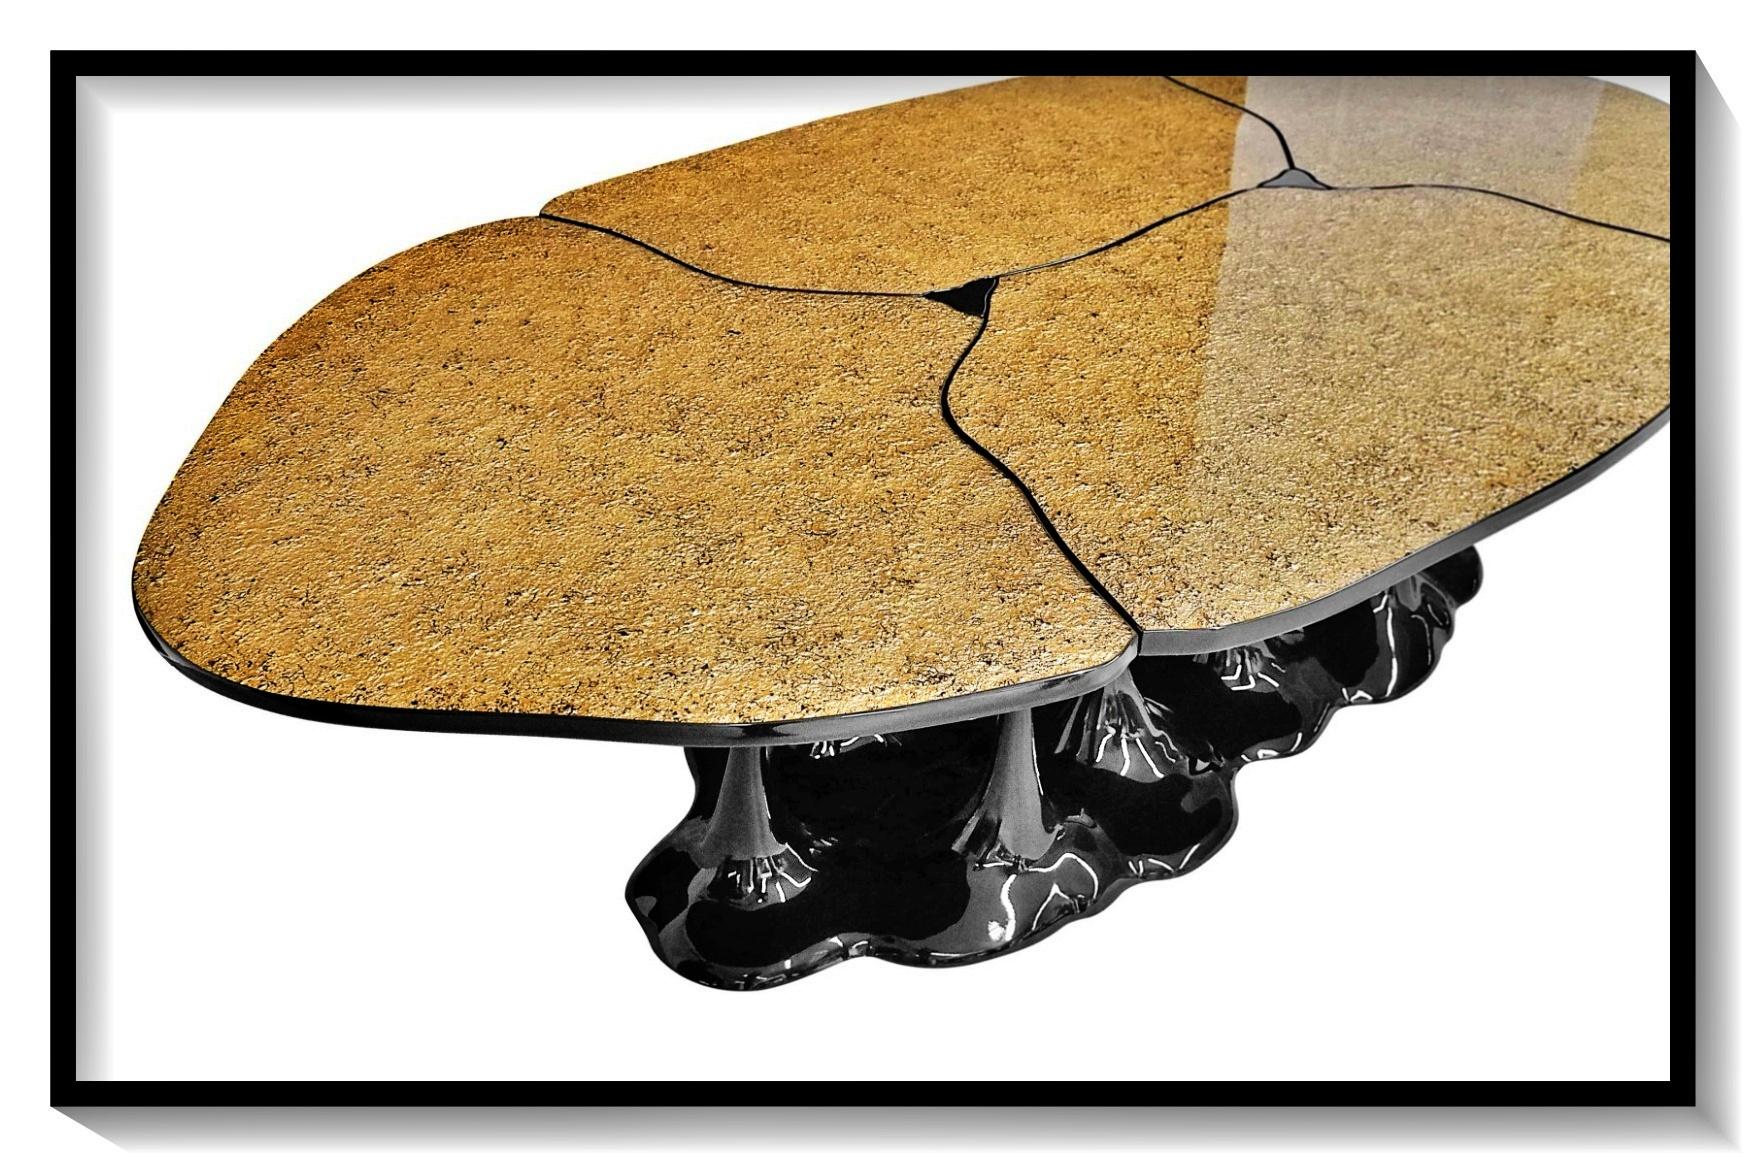 Dining table.

General Information
Dimensions (cm): 250 x 130 x 75.
Dimensions (in): 98.4 x 51.2 x 29.5.
Seats: 8 a 10.

Materials and Colors
Top: Textured gold leaf finish covered by clear resin;
Base: Resin reinforced with fiberglass, lacquered in